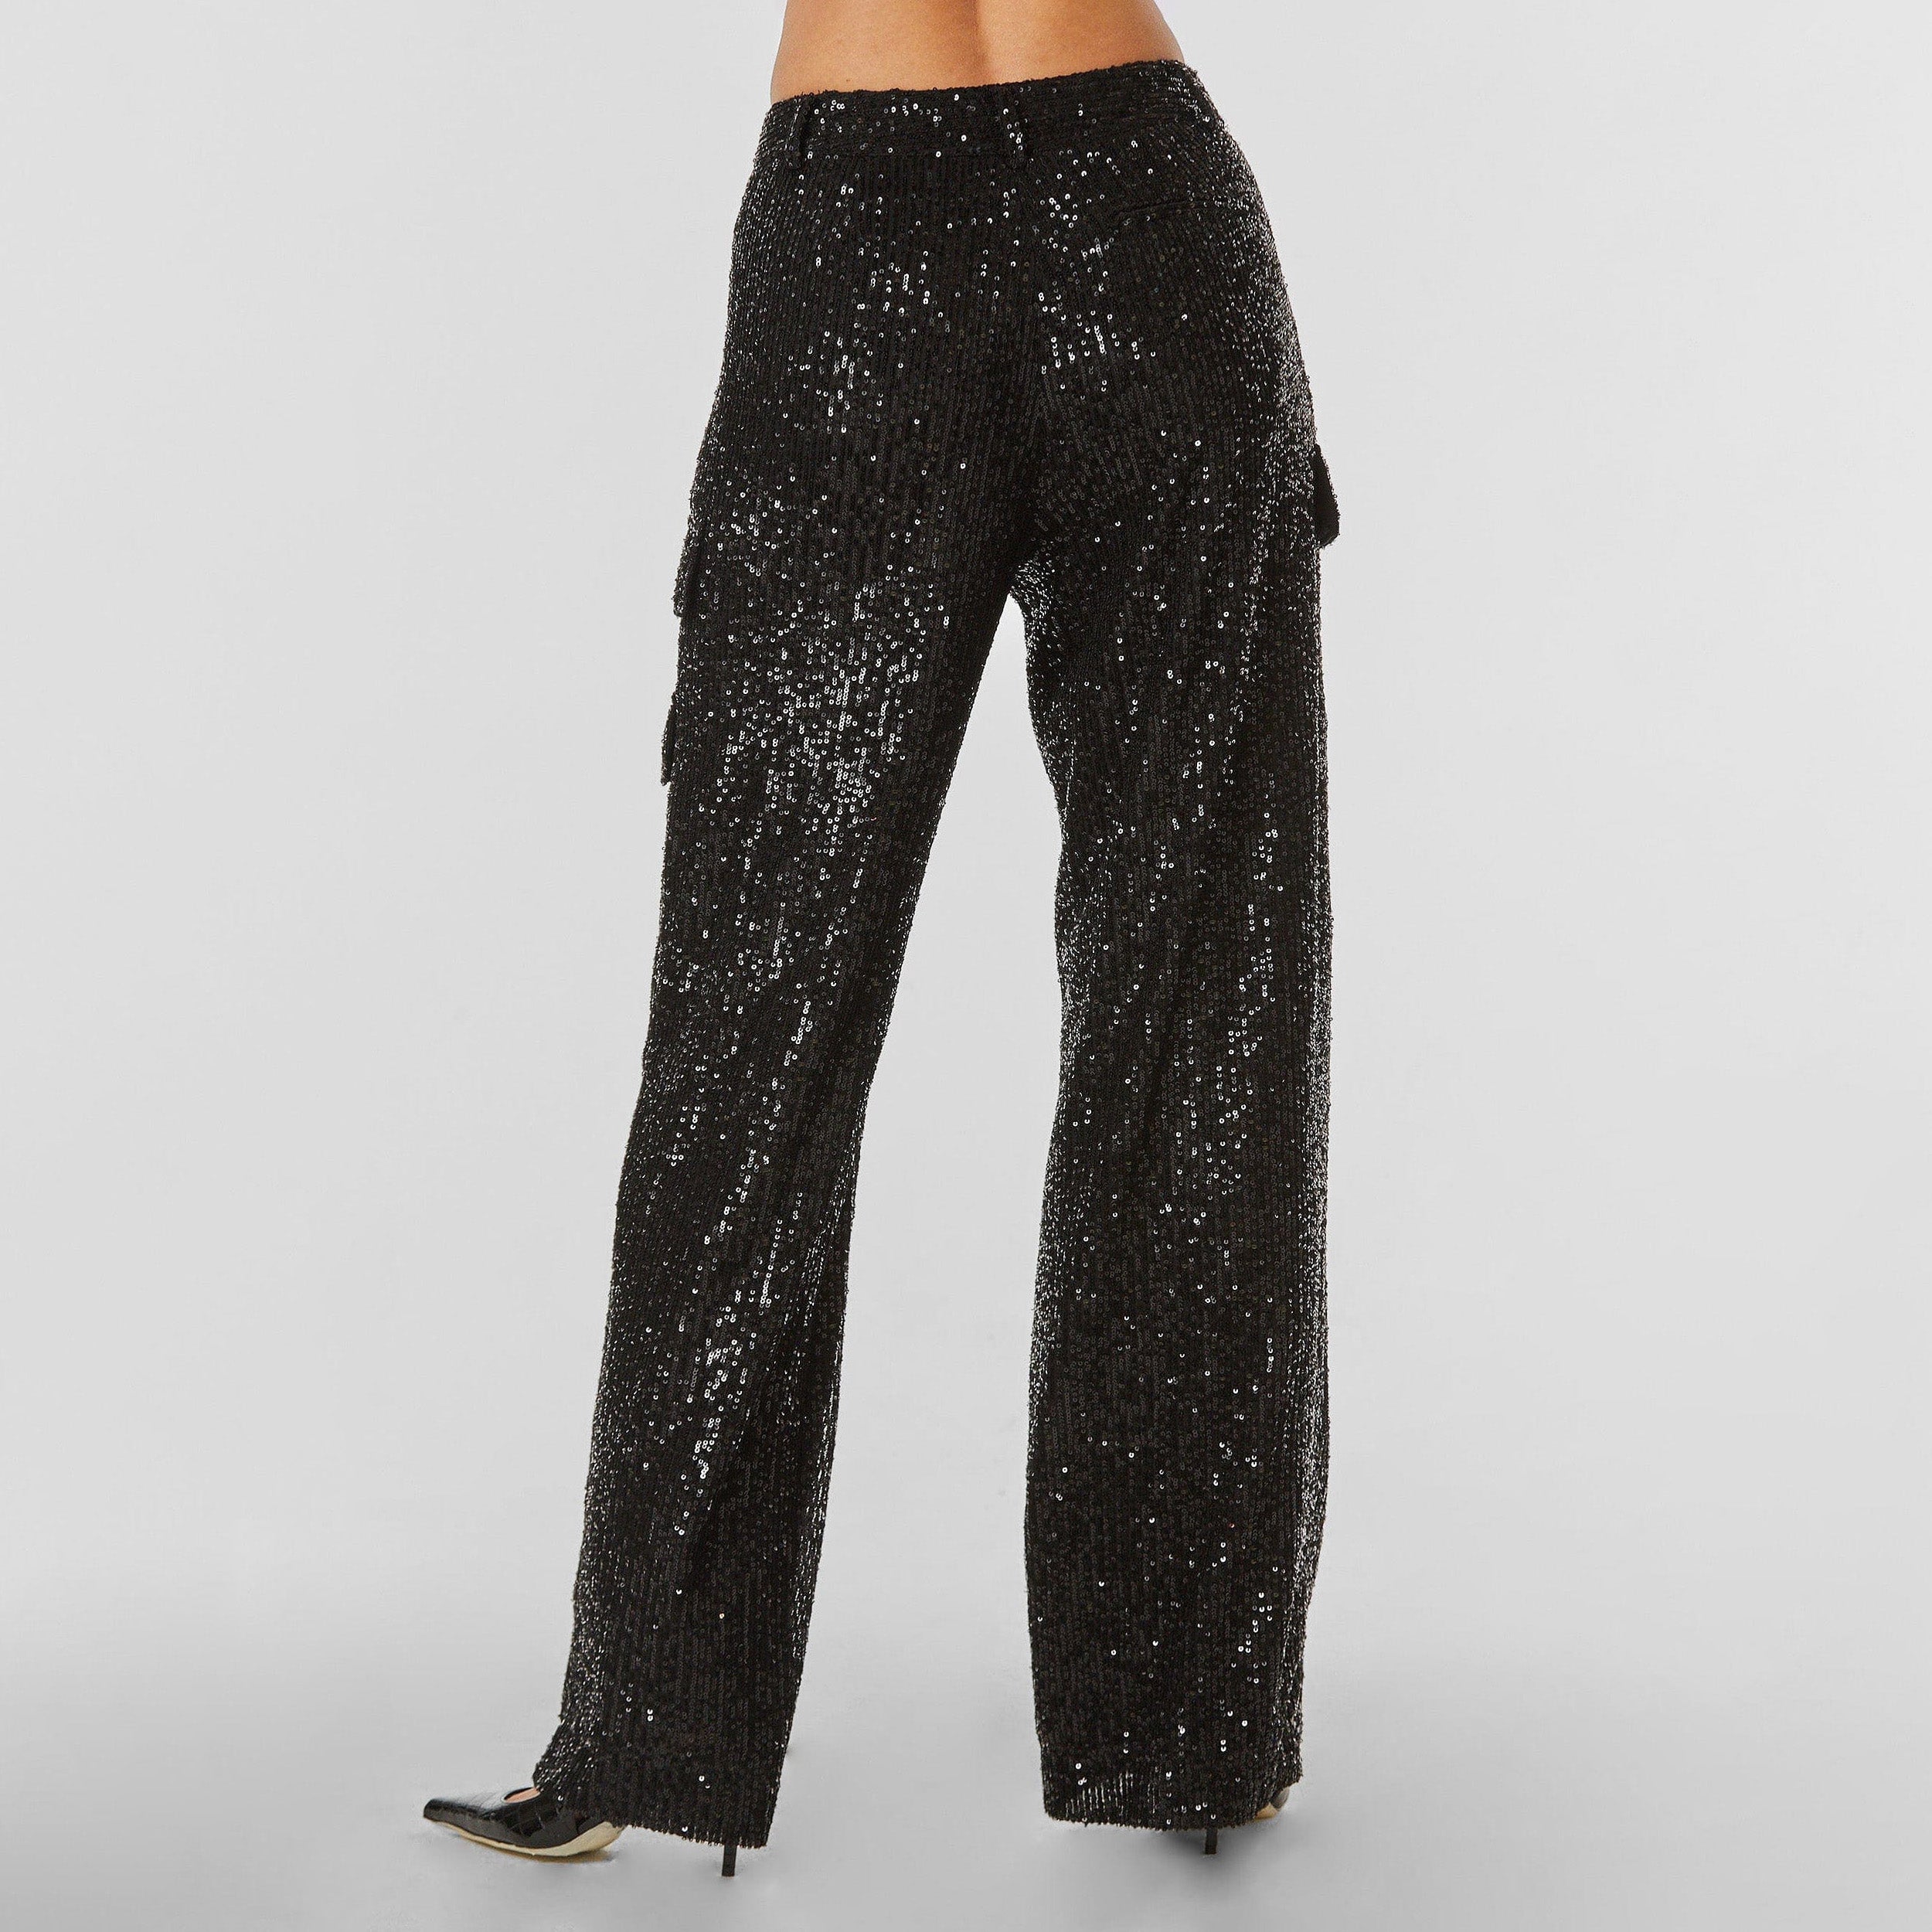 Rear view of woman wearing Black Sequin Cargo Pant featuring Mid-rise with side pockets and cargo detail. 